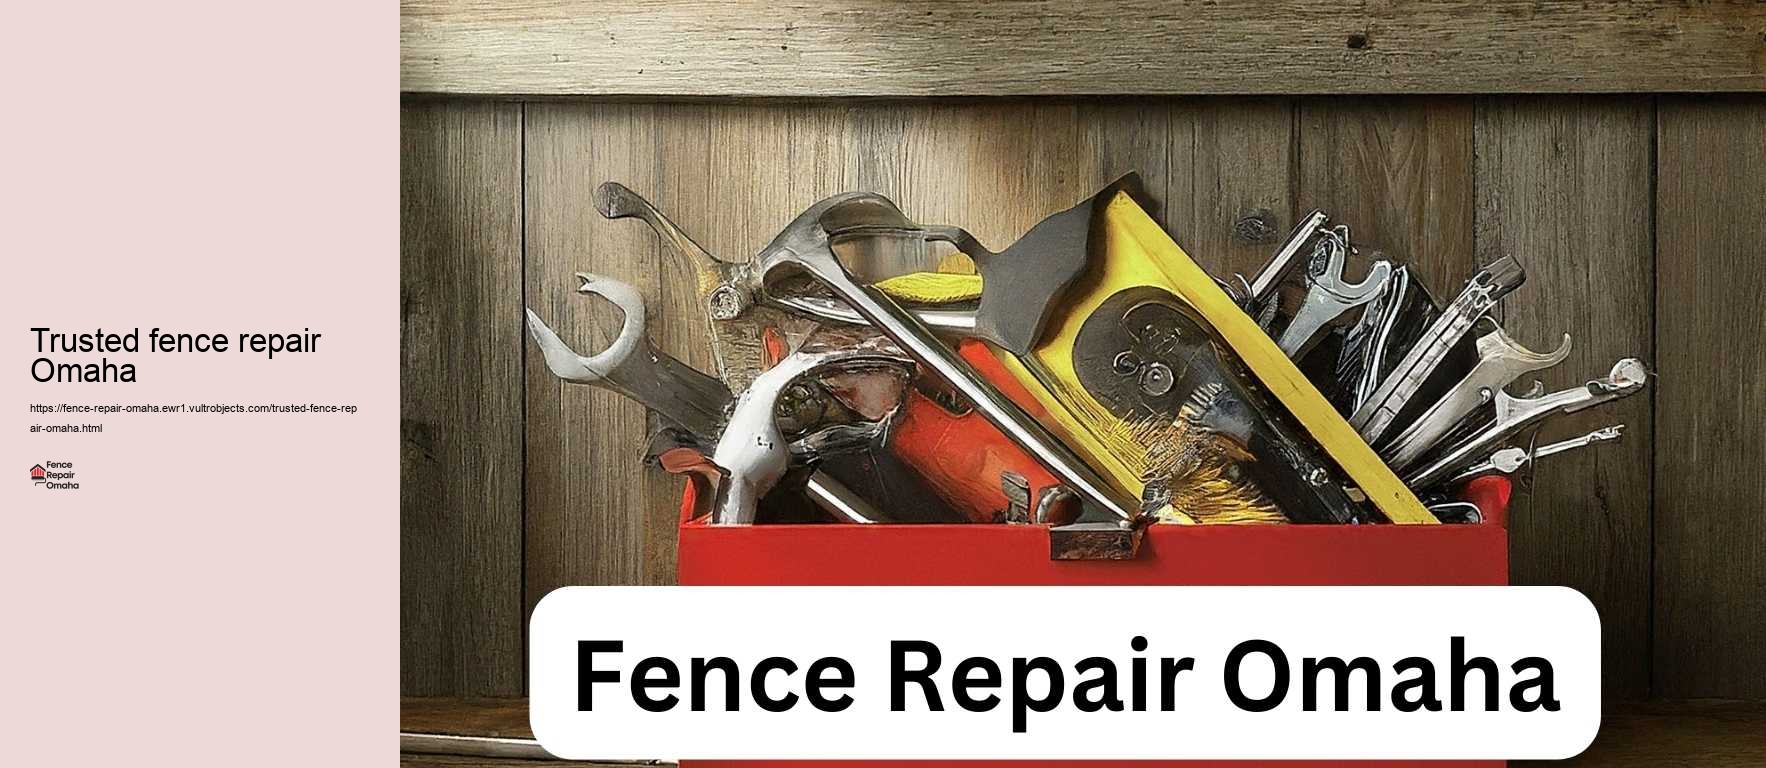 Trusted fence repair Omaha